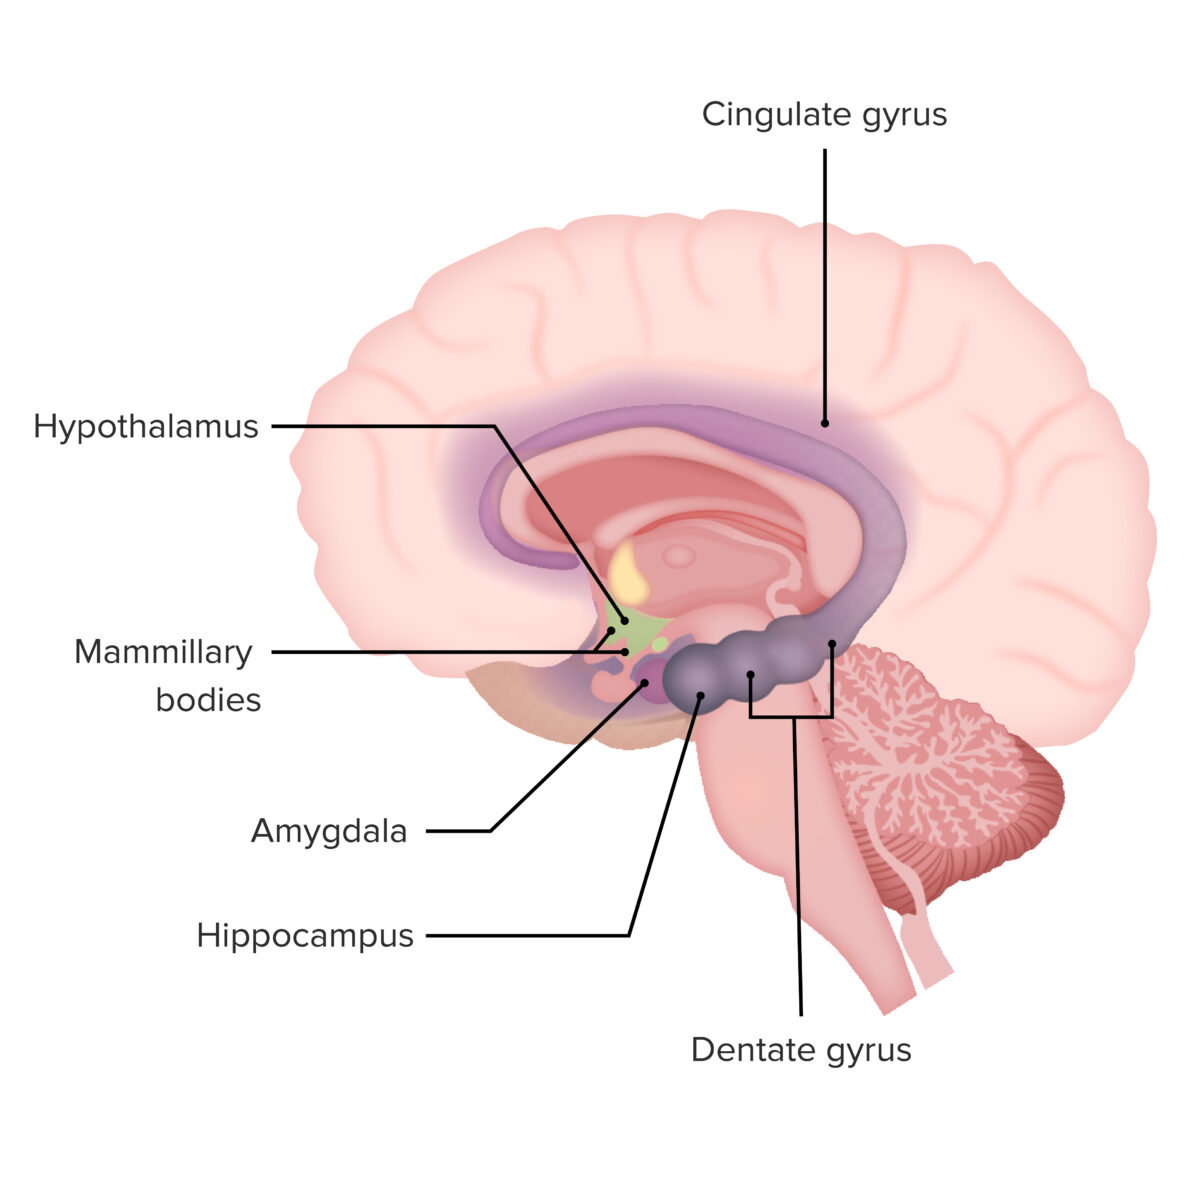 Primary components of the limbic system